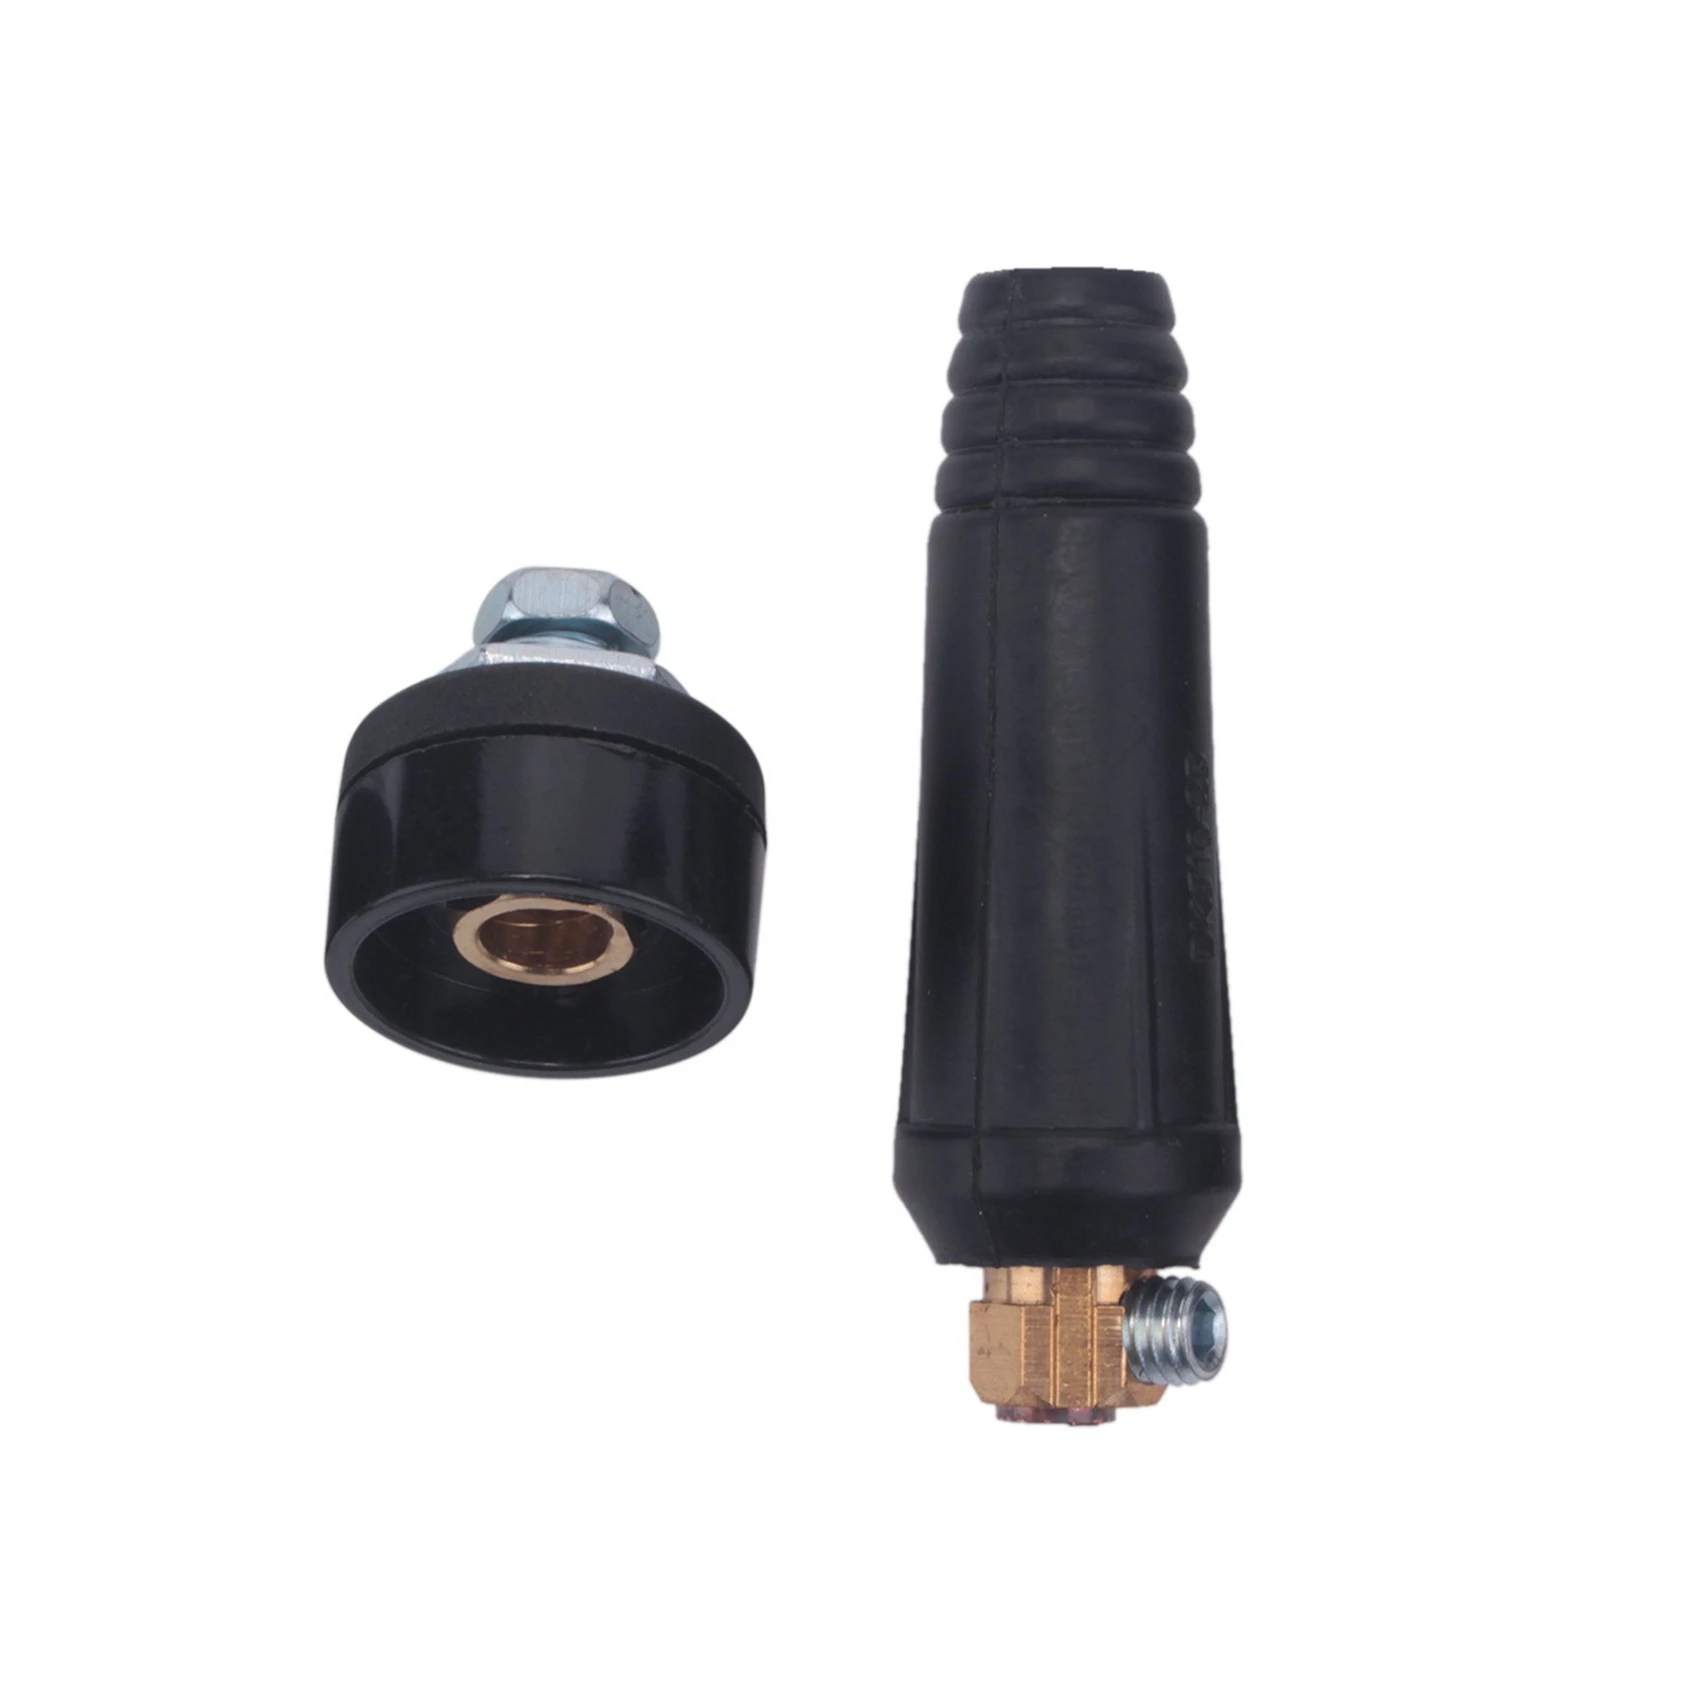 1 Set of Black European Style Electric Welding Machine Cable Connector DKJ 10-25 Quick Connector Plug Socket 1pcs wire feeder connector to co2 mig welding torch gas shielded welding gun panasonic european style conversion plug connector